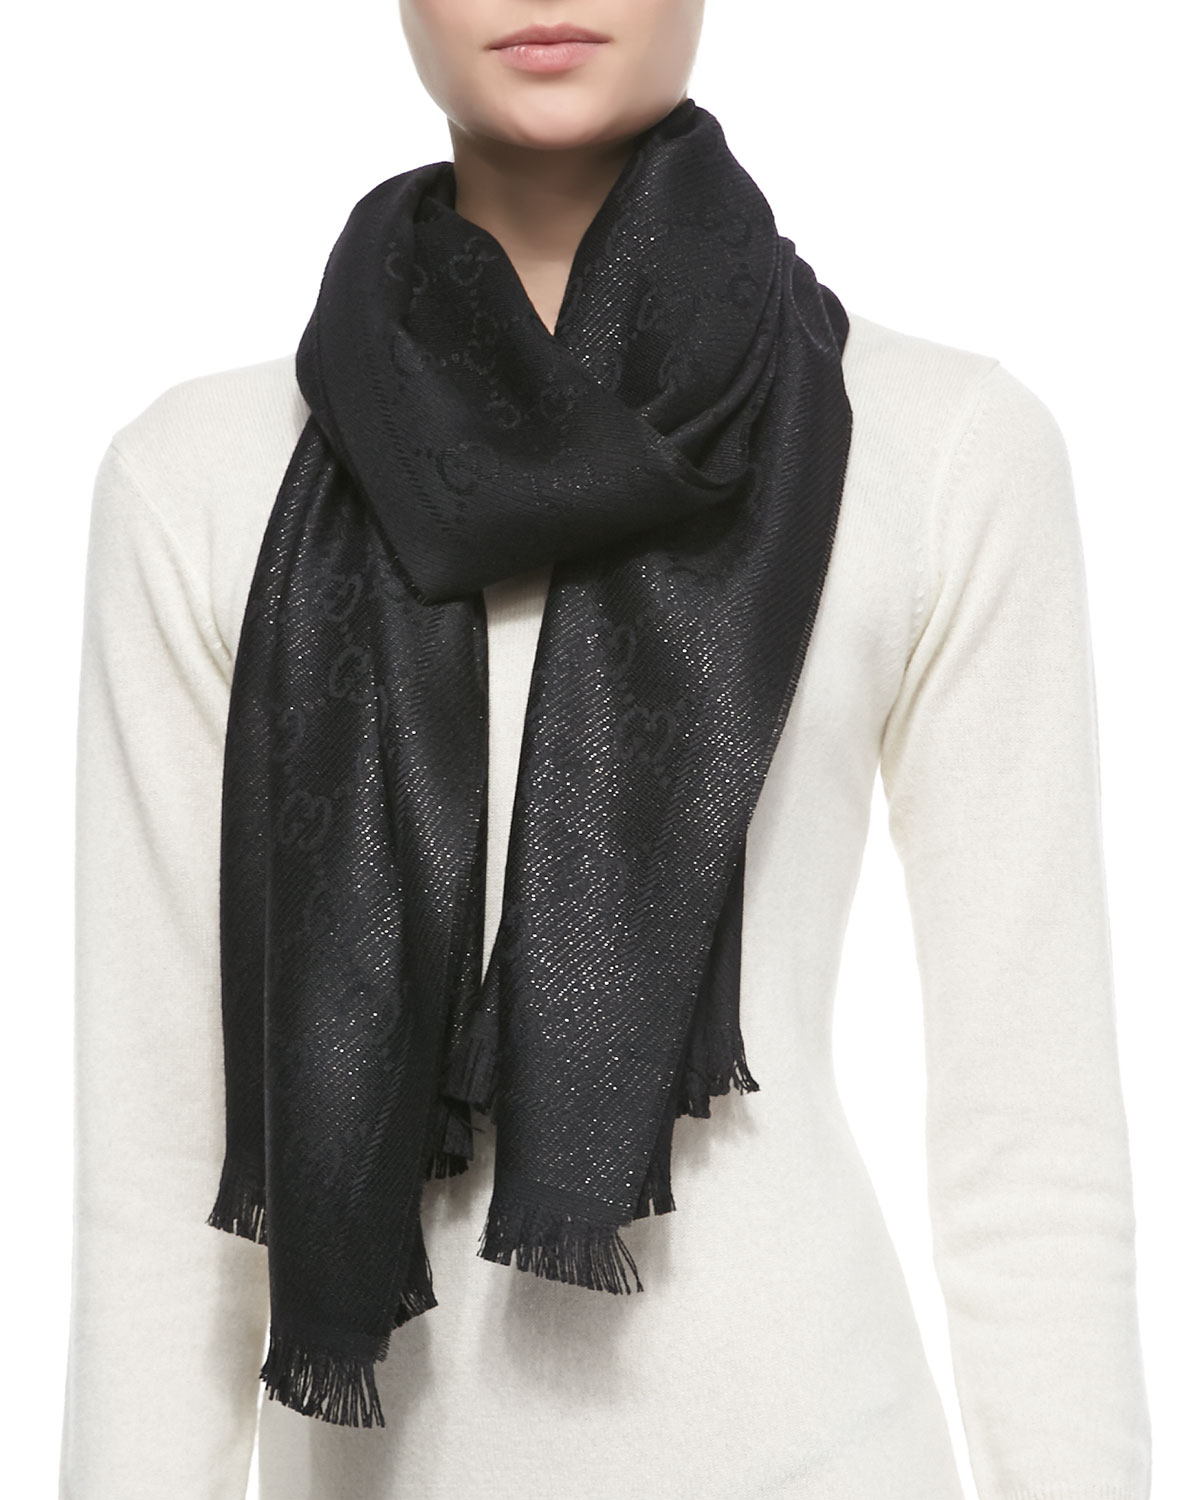 Gucci Shimmery Gg Pattern Scarf in Black | Lyst